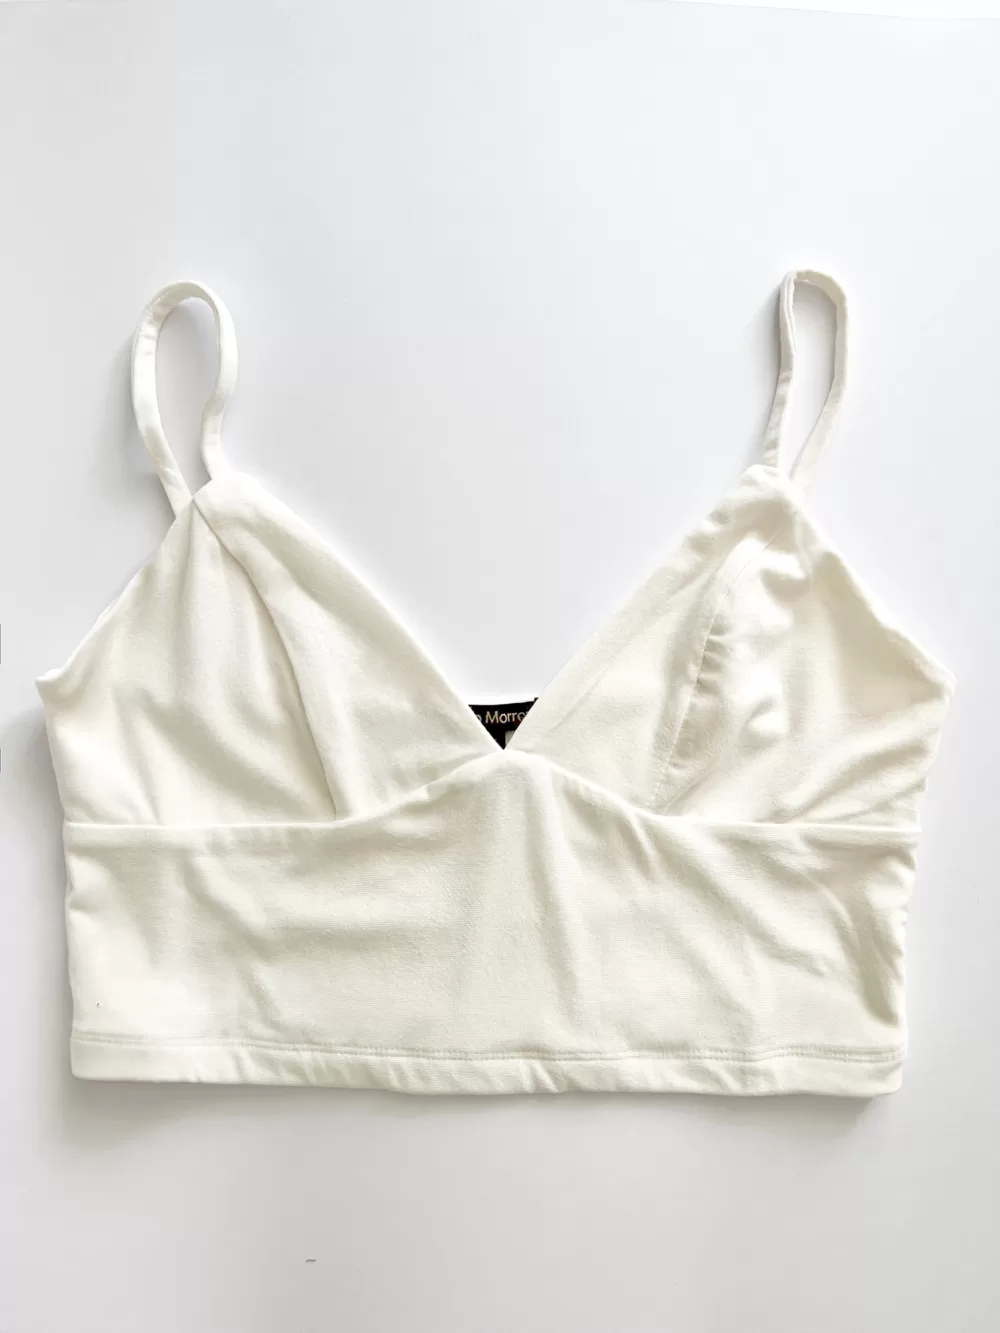 Your Favorite Lounge Bralette - N-Duo-Concept